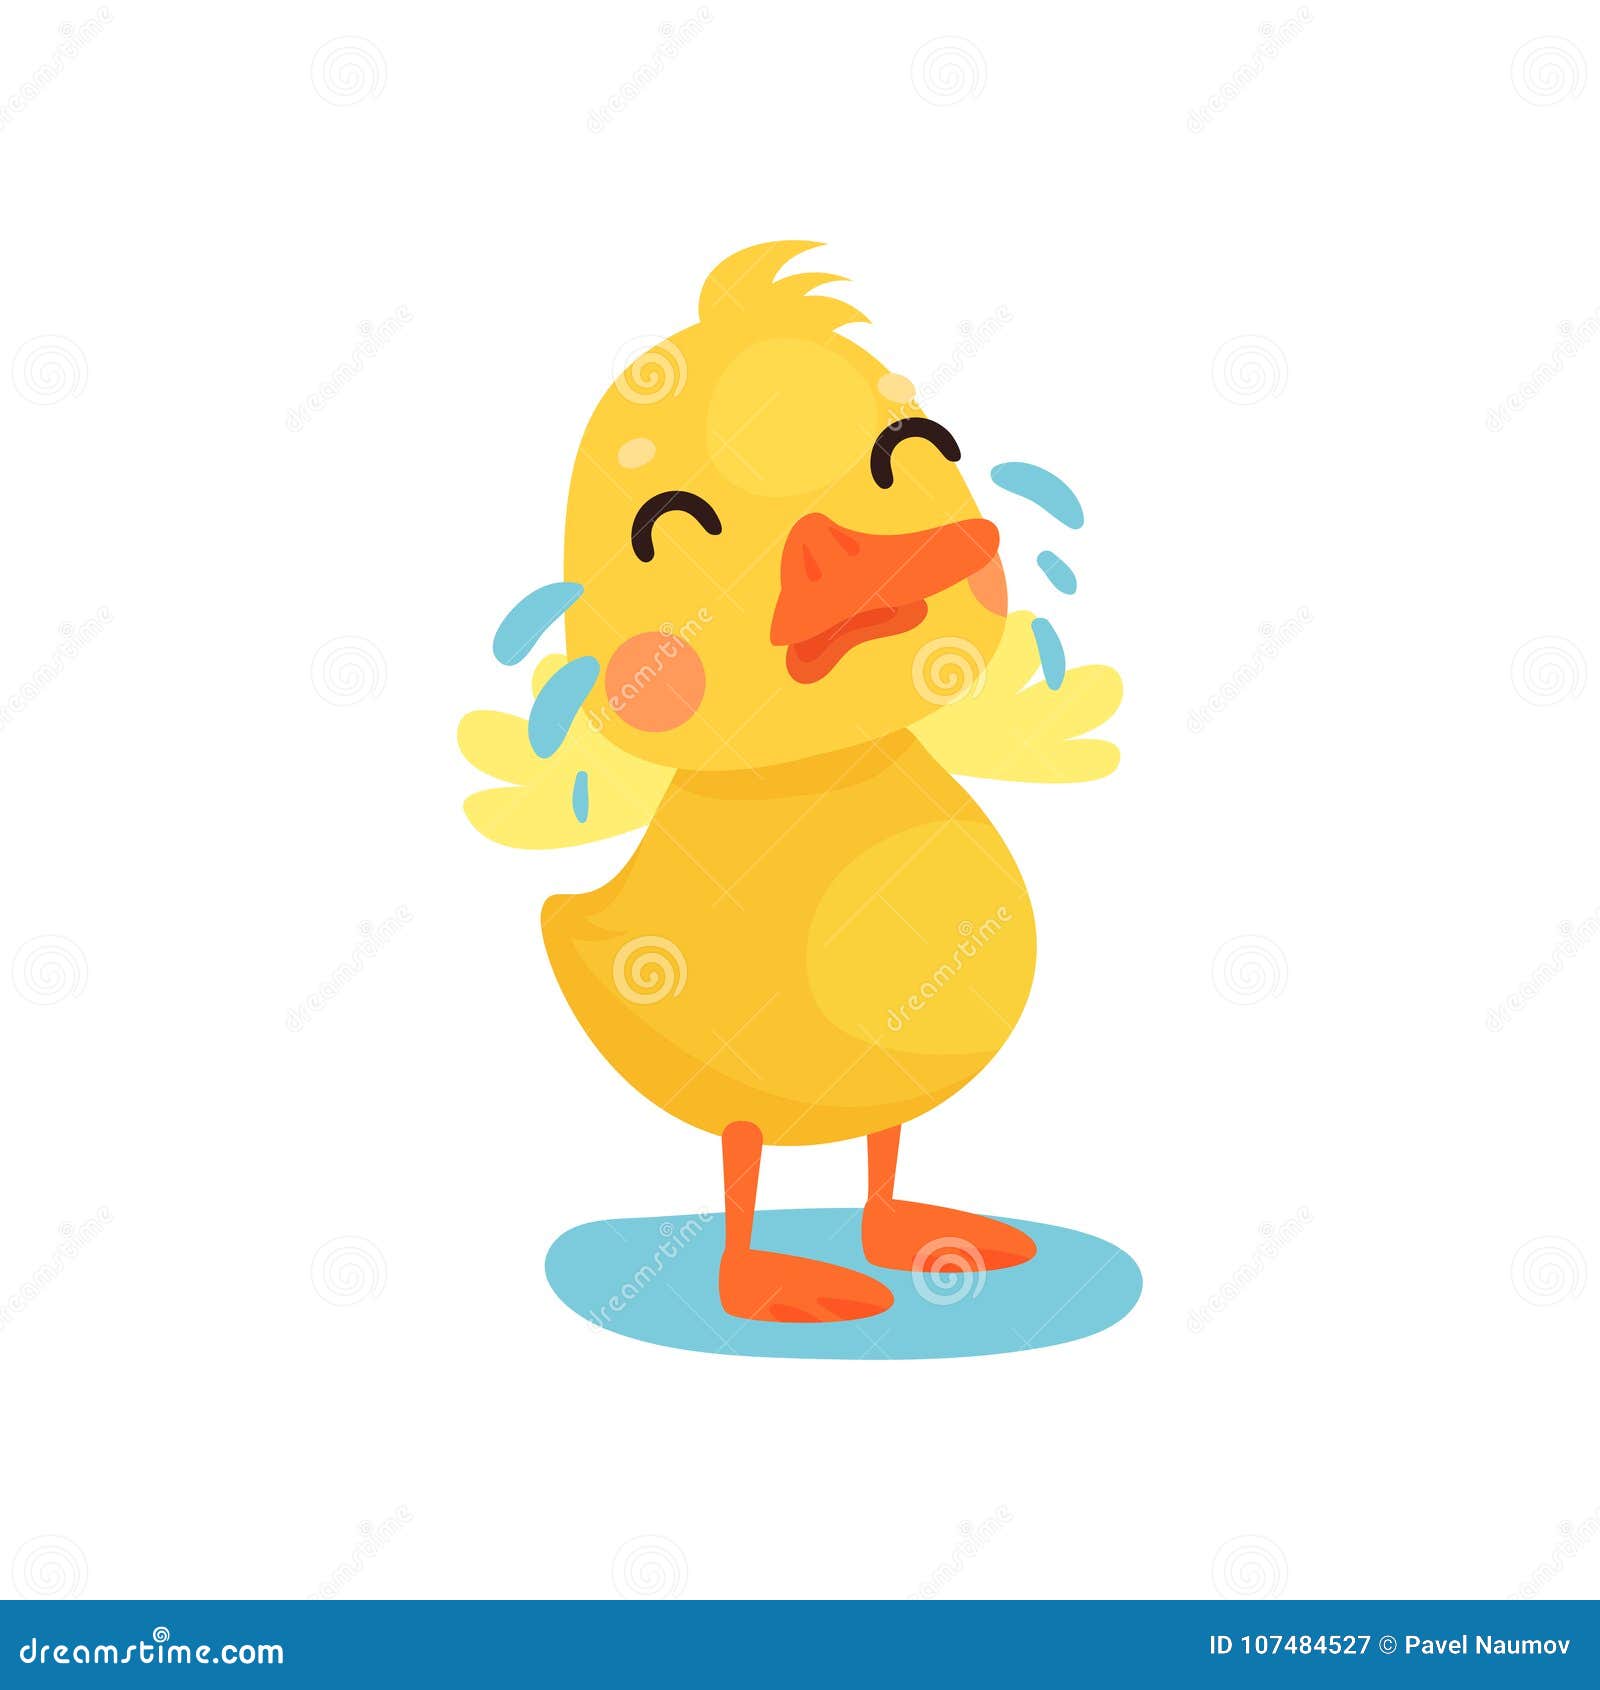 Cute Little Yellow Duck Chick Character Crying Cartoon Vector Illustration  Stock Vector - Illustration of chicken, duck: 107484527